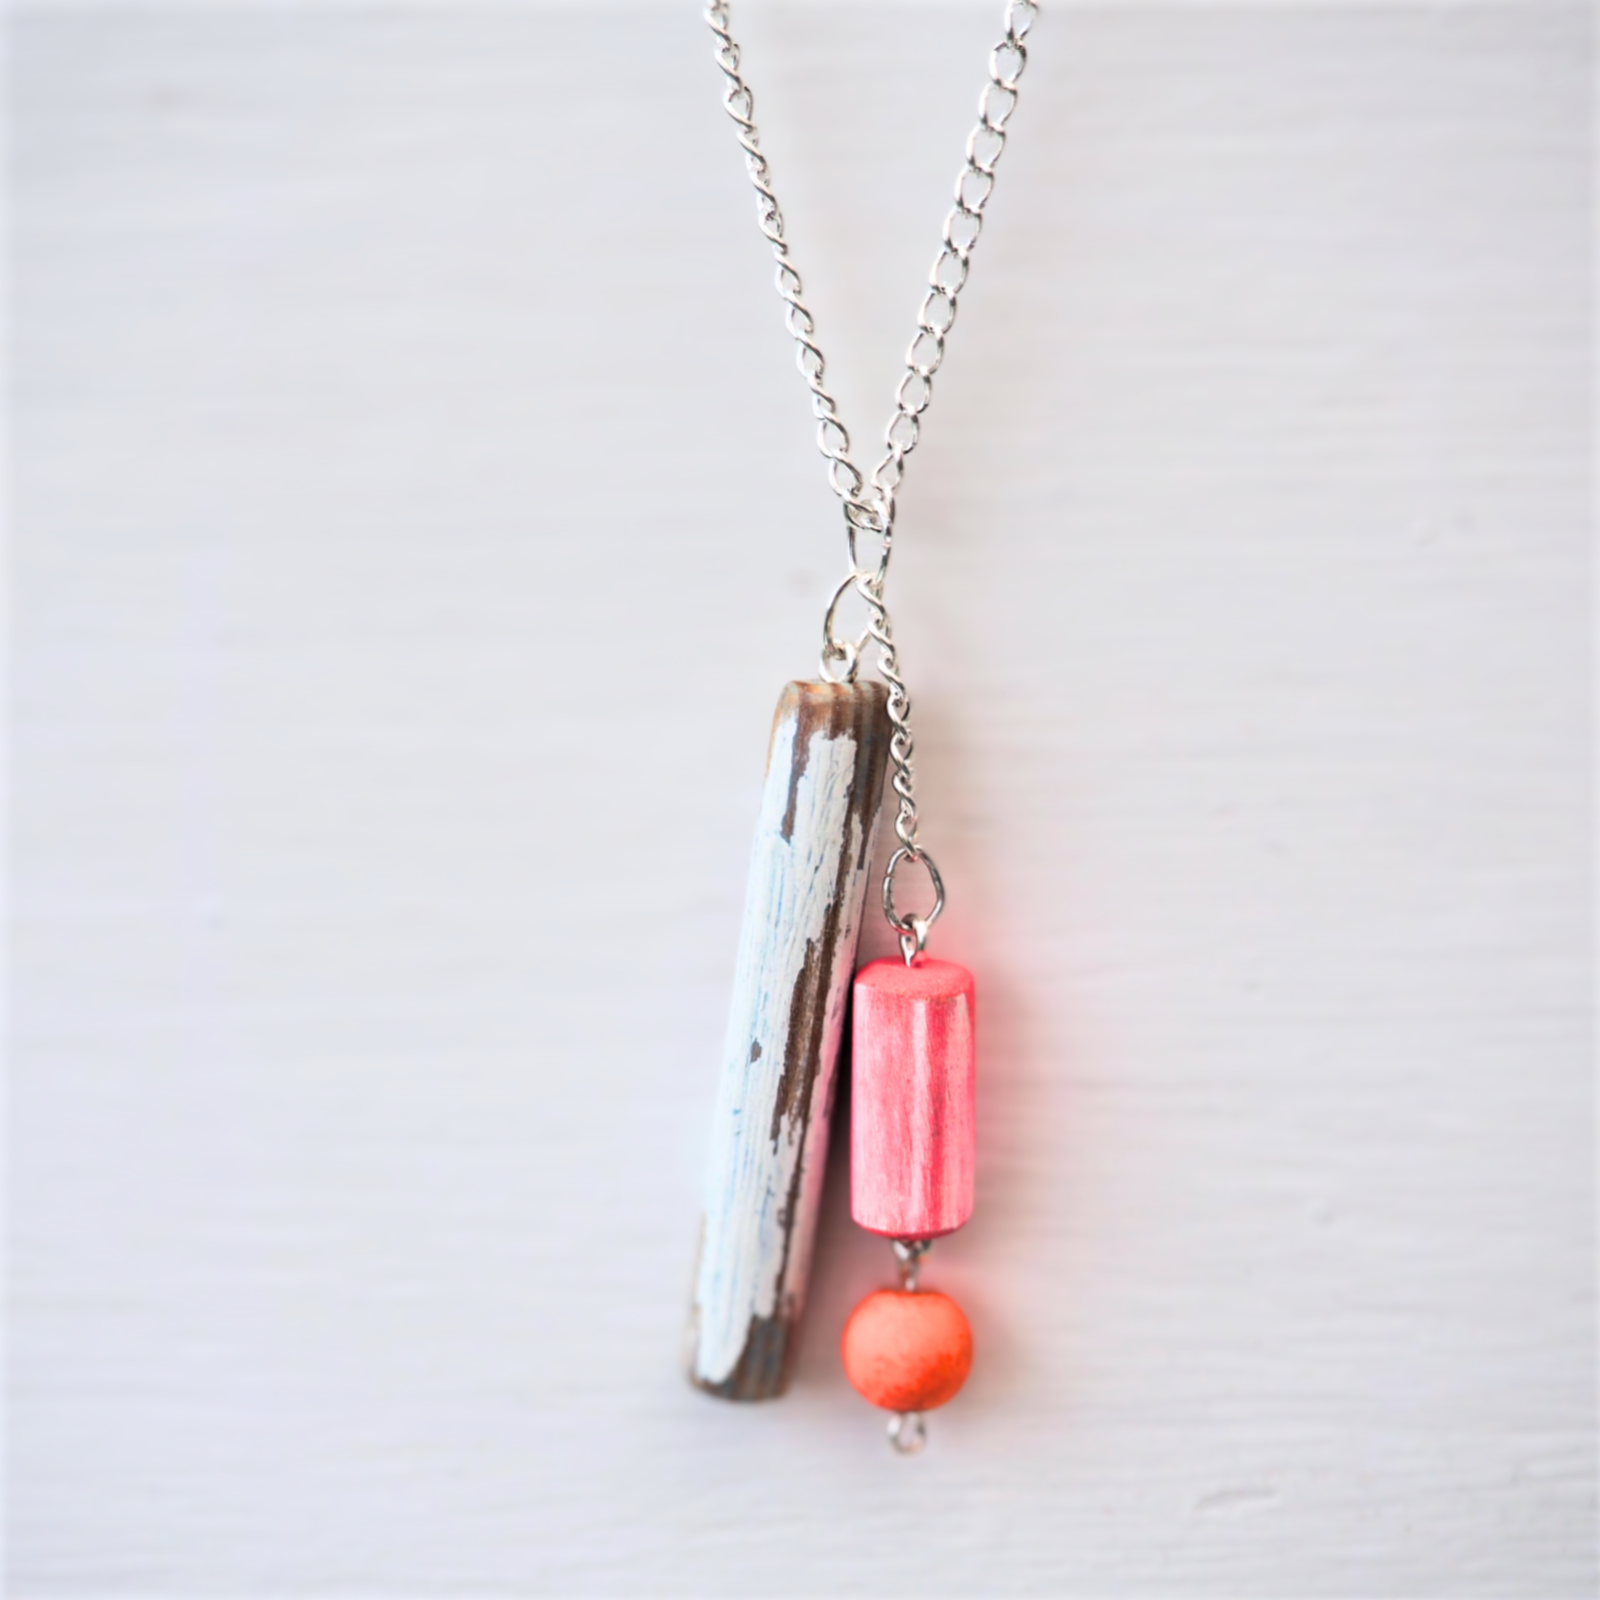 Found object pendant necklace 